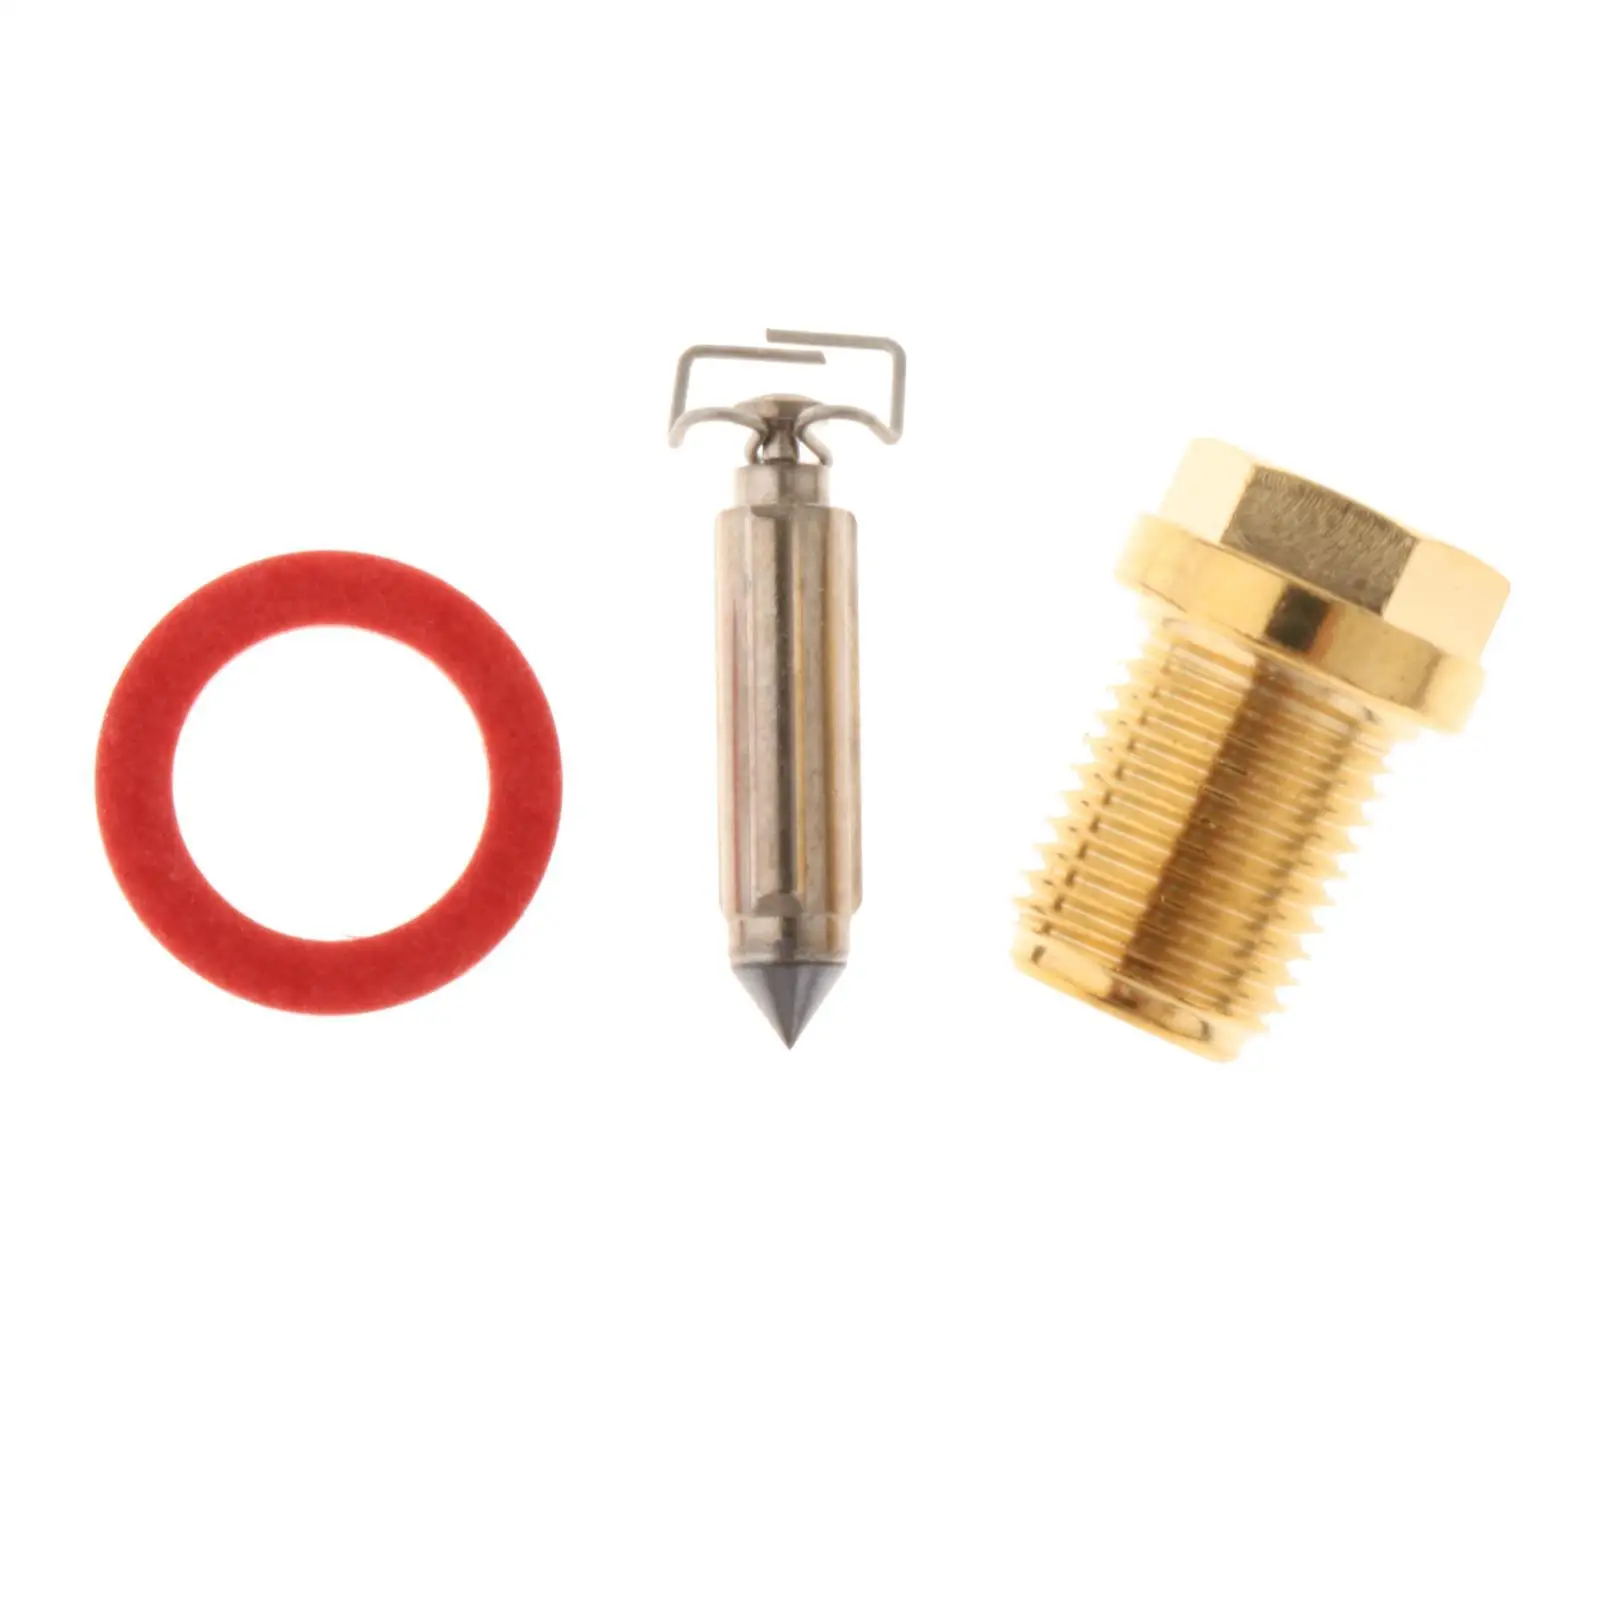 Carburetor Float Needle Valve Seat Assembly 6F5-14390-12 for Yamaha Outboard E40G E40J 2 Stroke K40 Durable Easy to Install